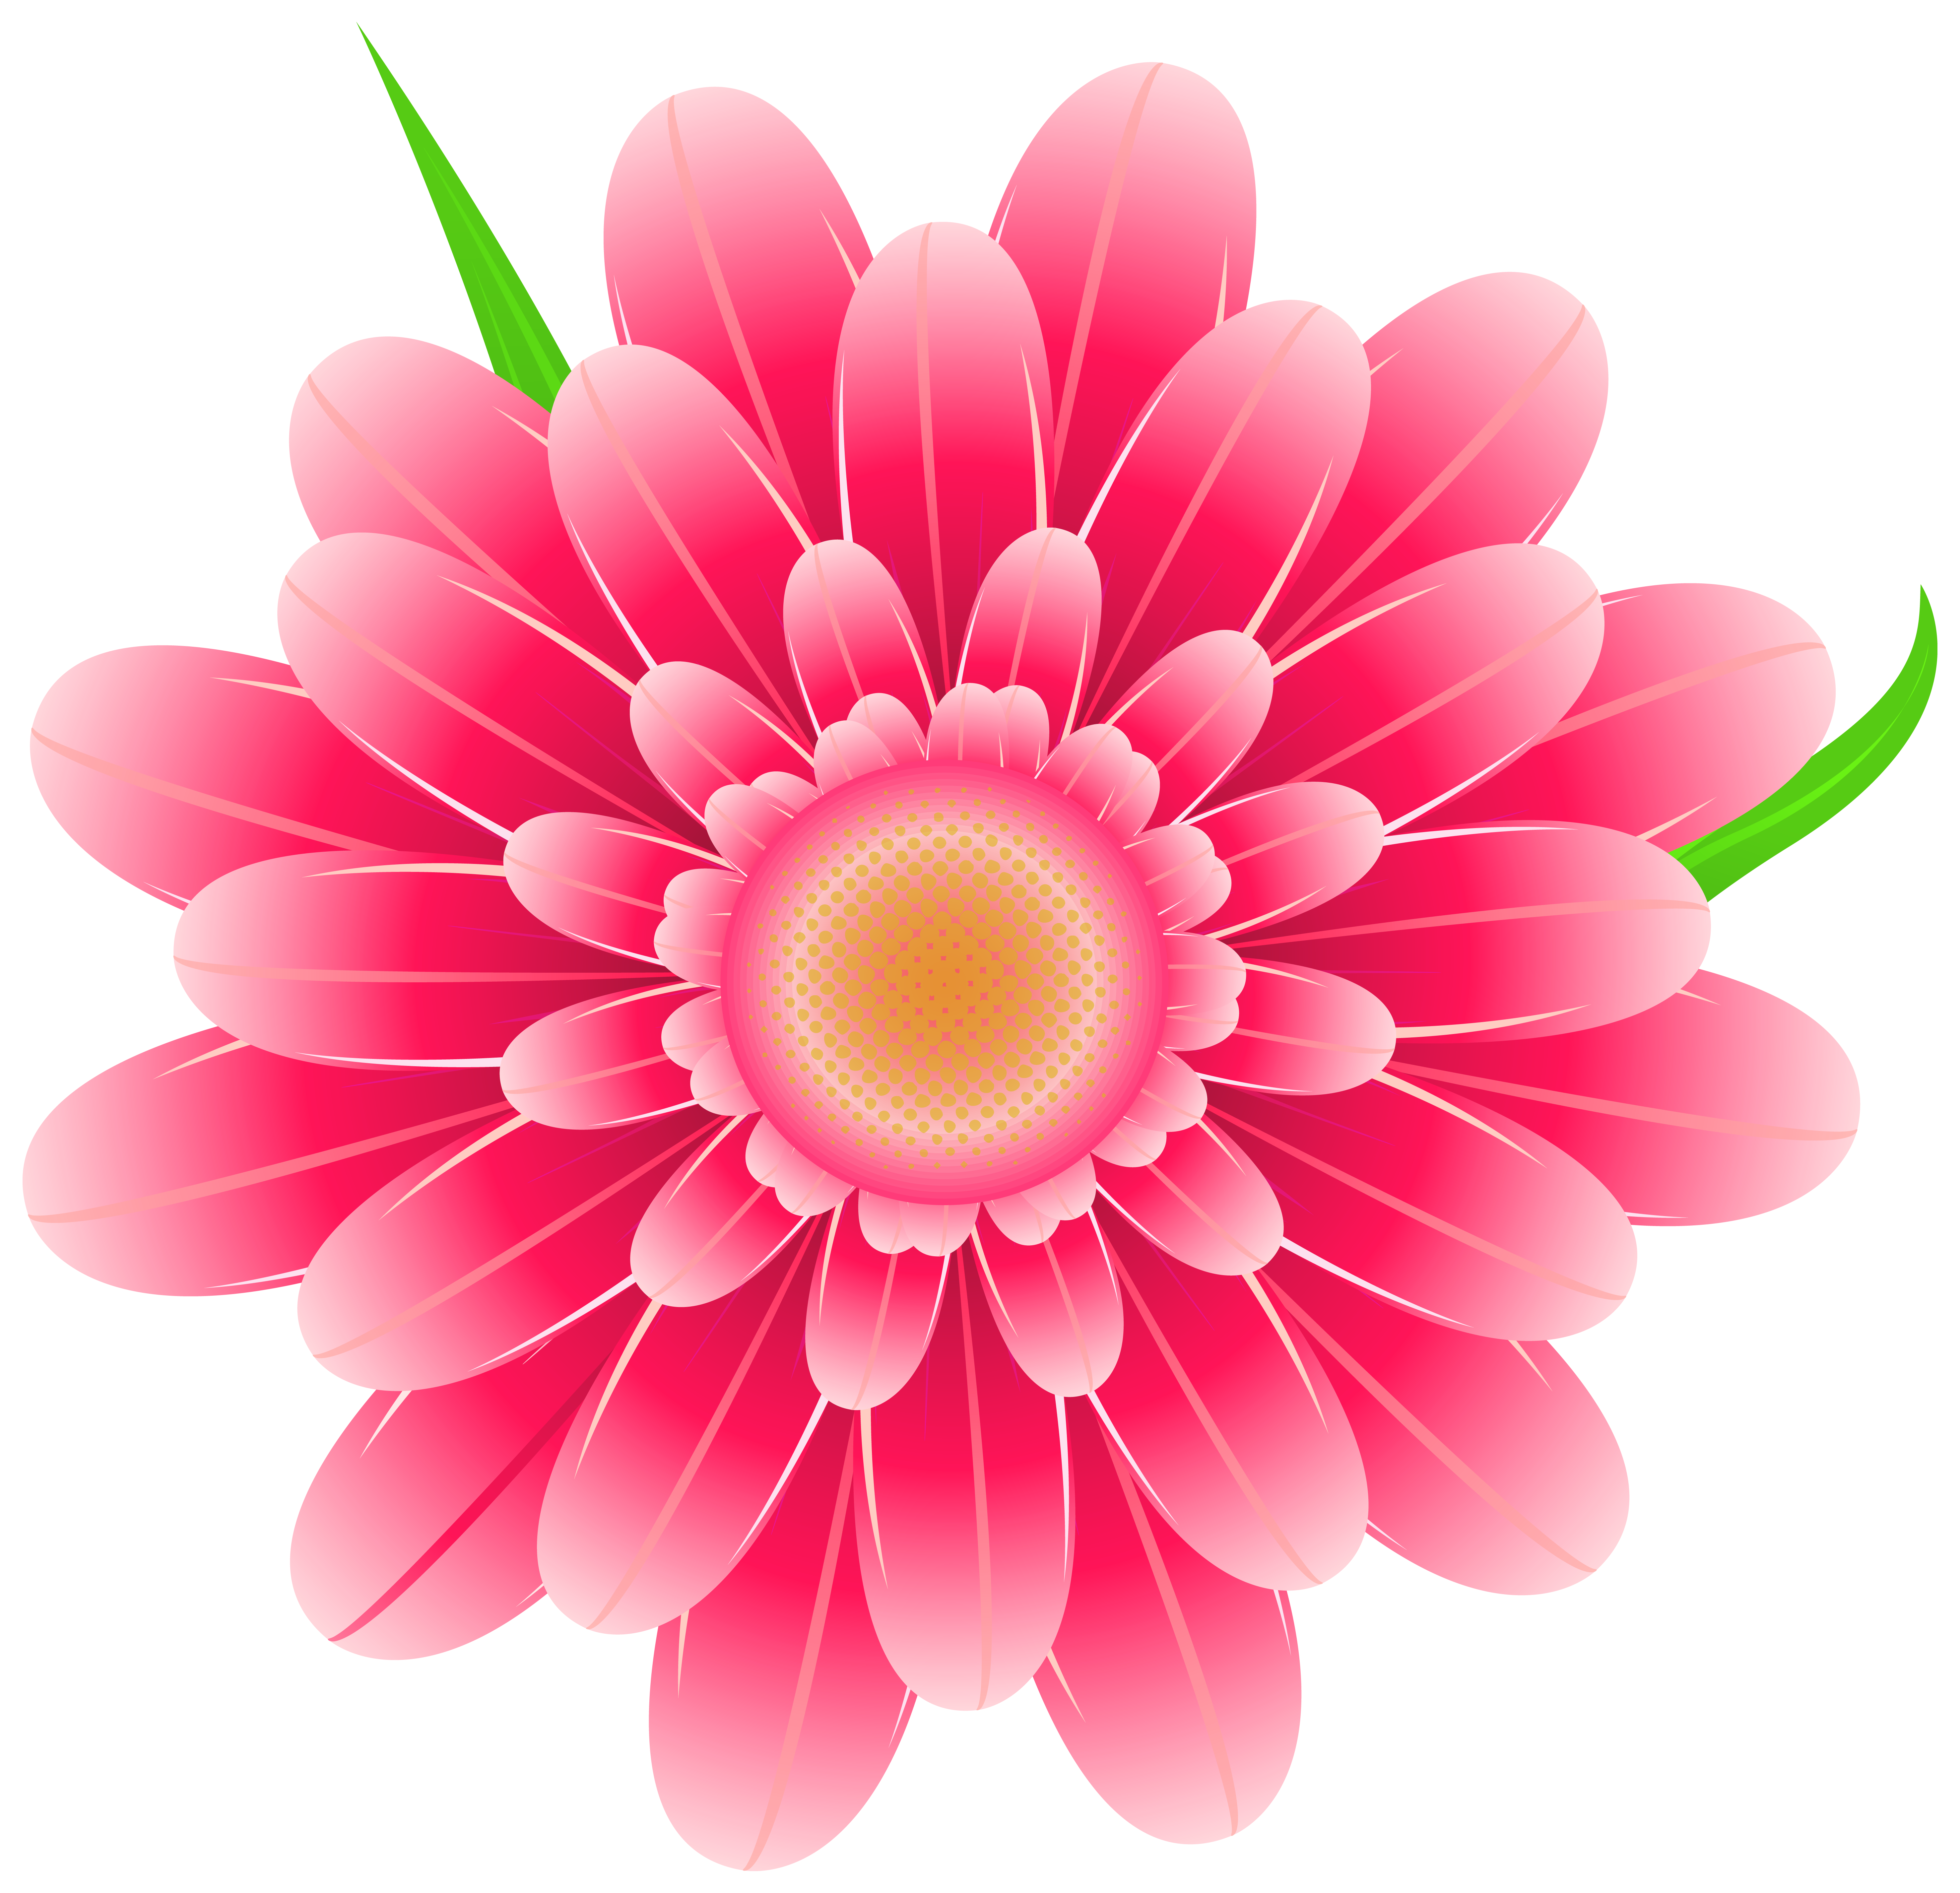 Pink flowers clipart - Clipground